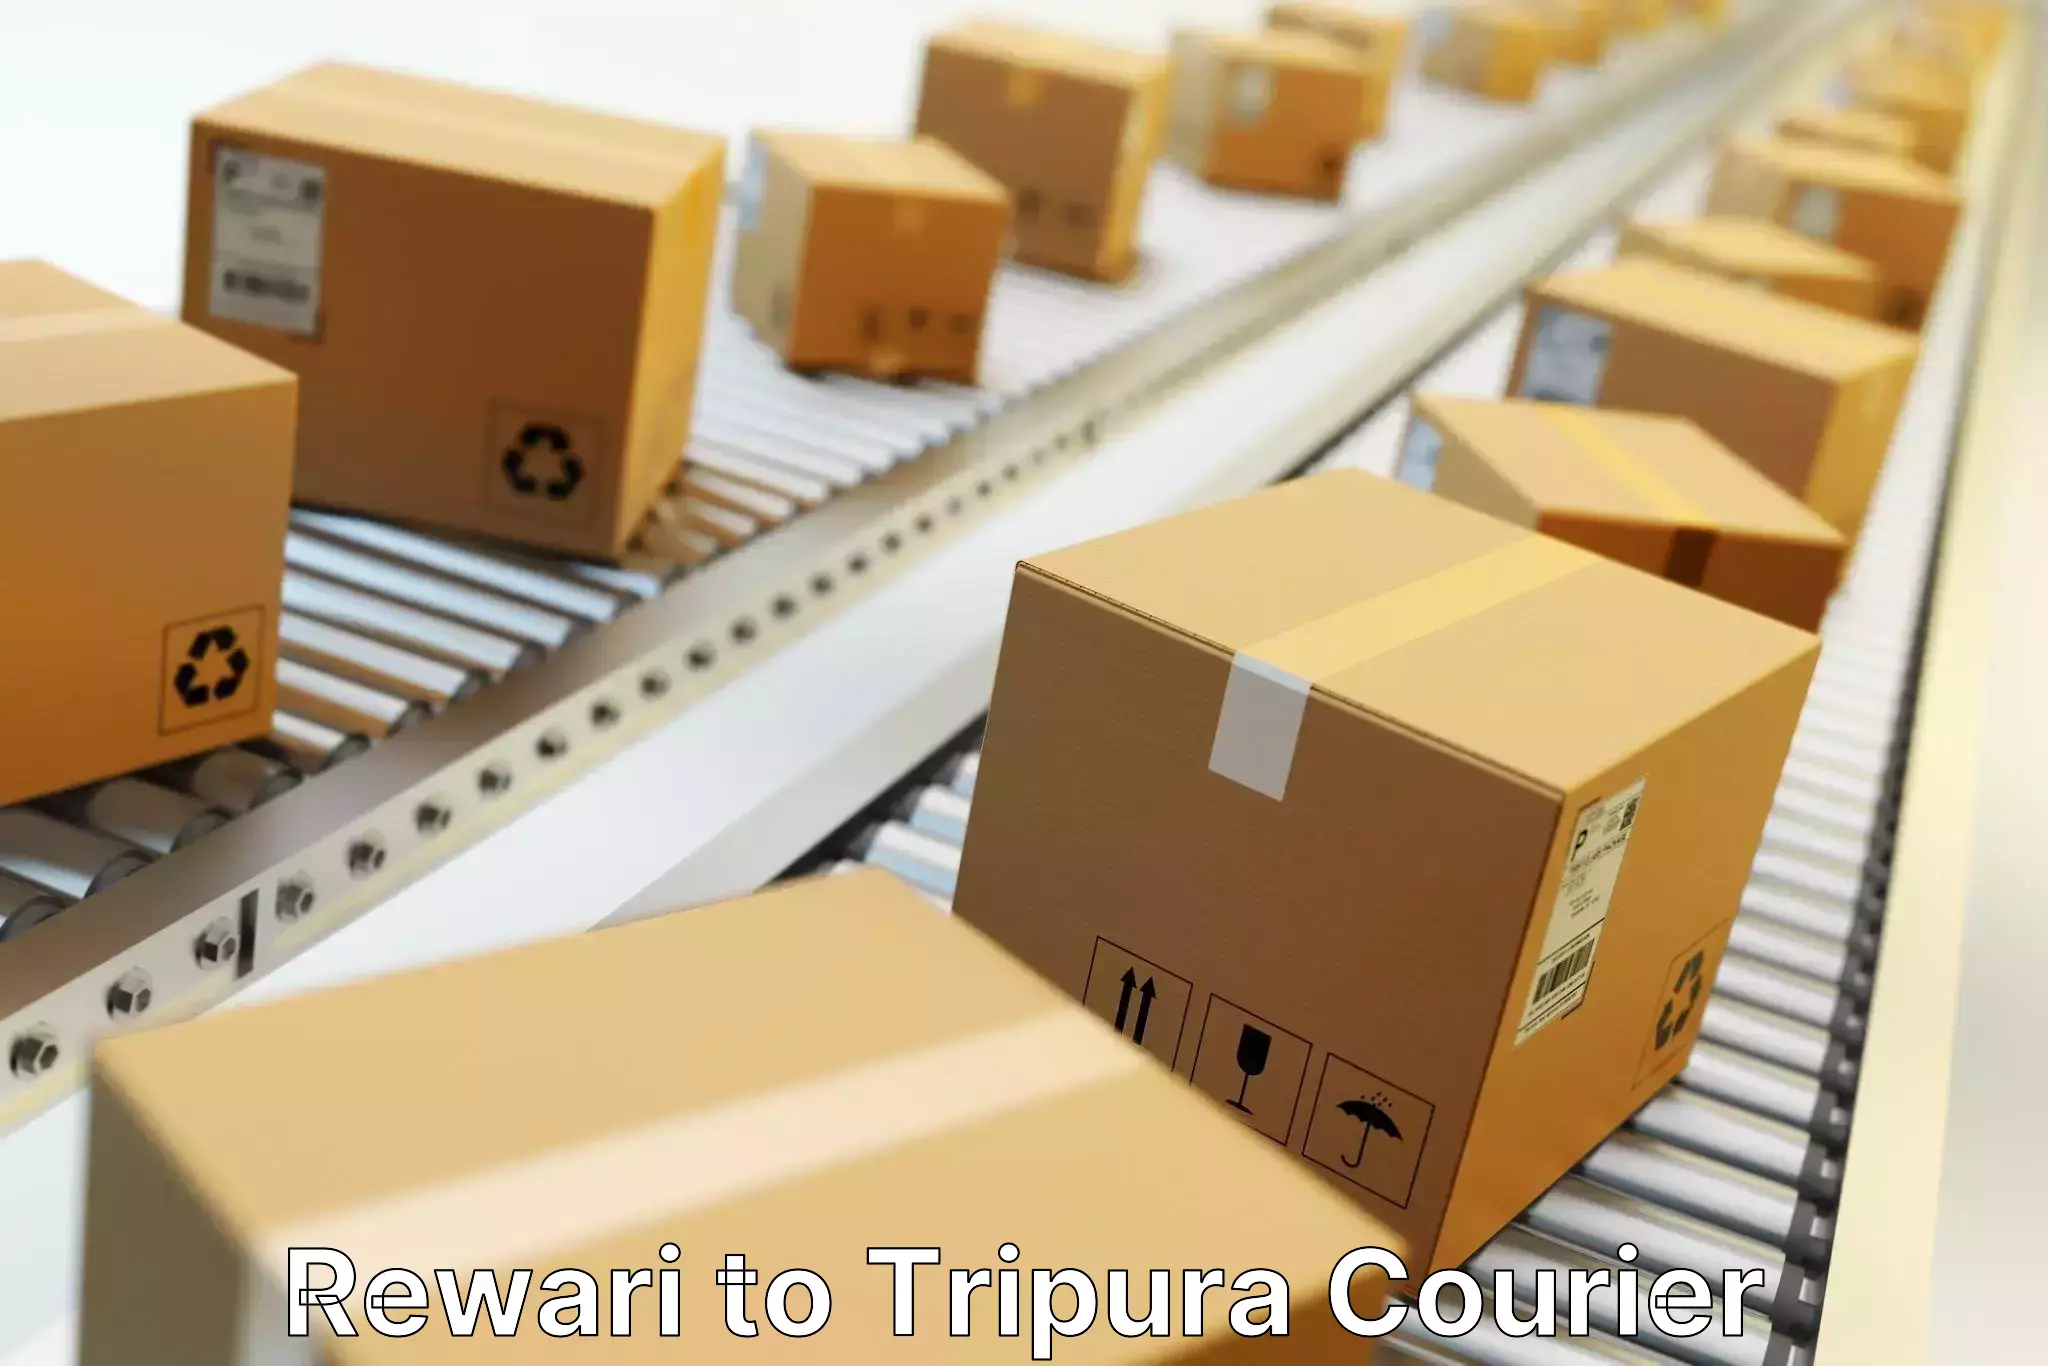 State-of-the-art courier technology Rewari to Tripura